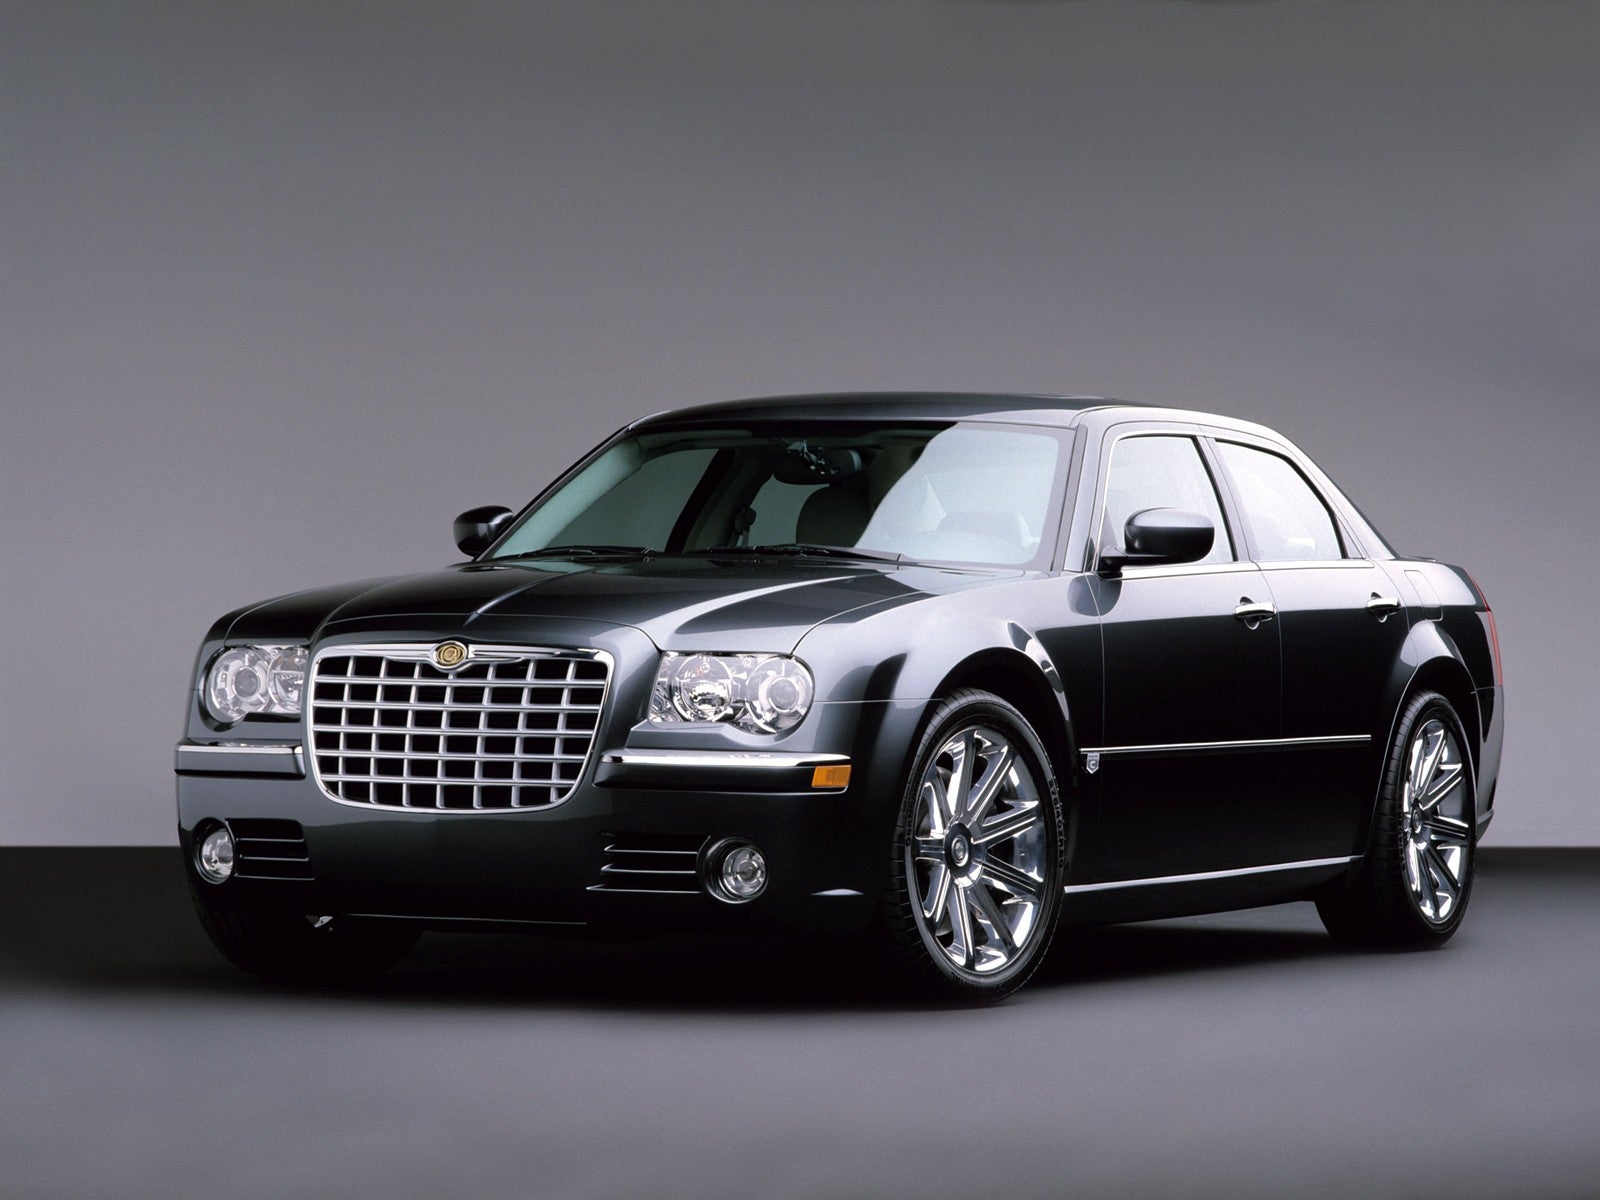 Chrysler 300 limited edition specs #4